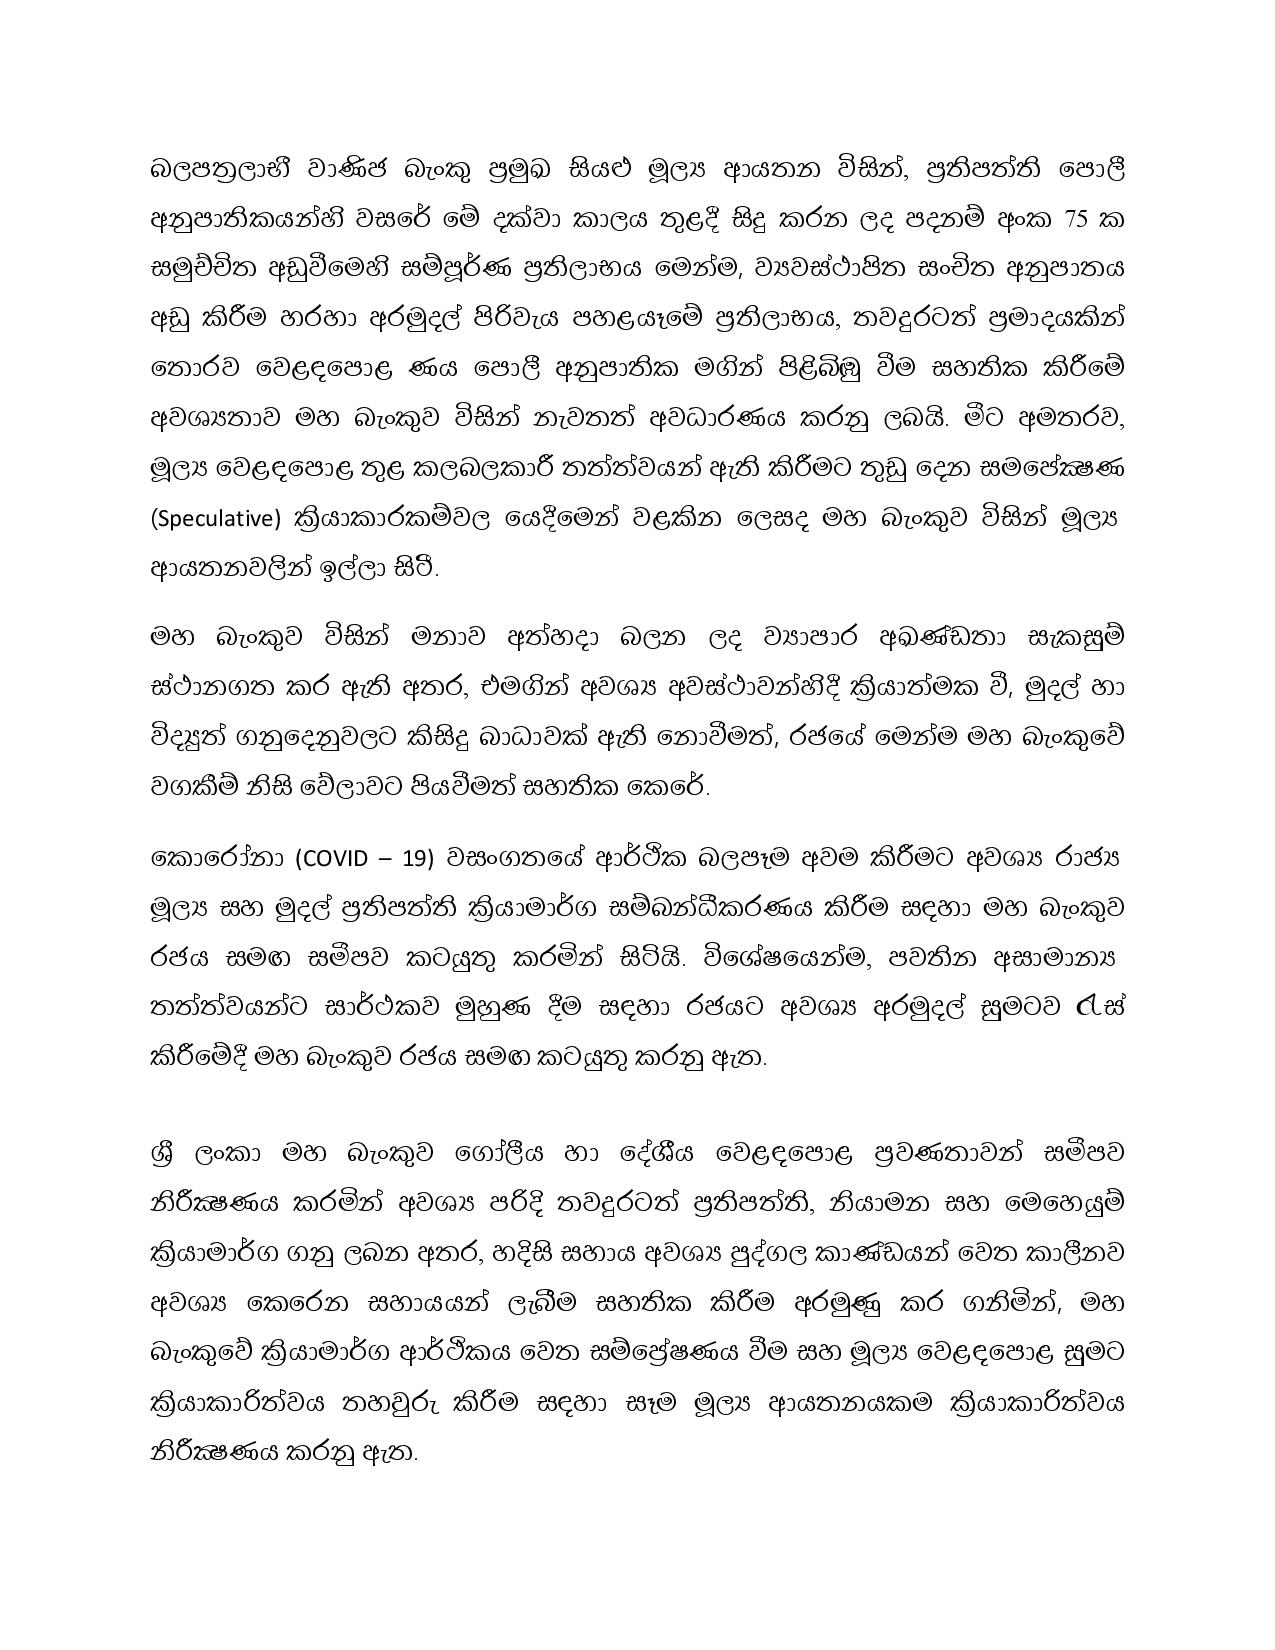 Press Release Special Monetary Policy 16.03.2020 page 003